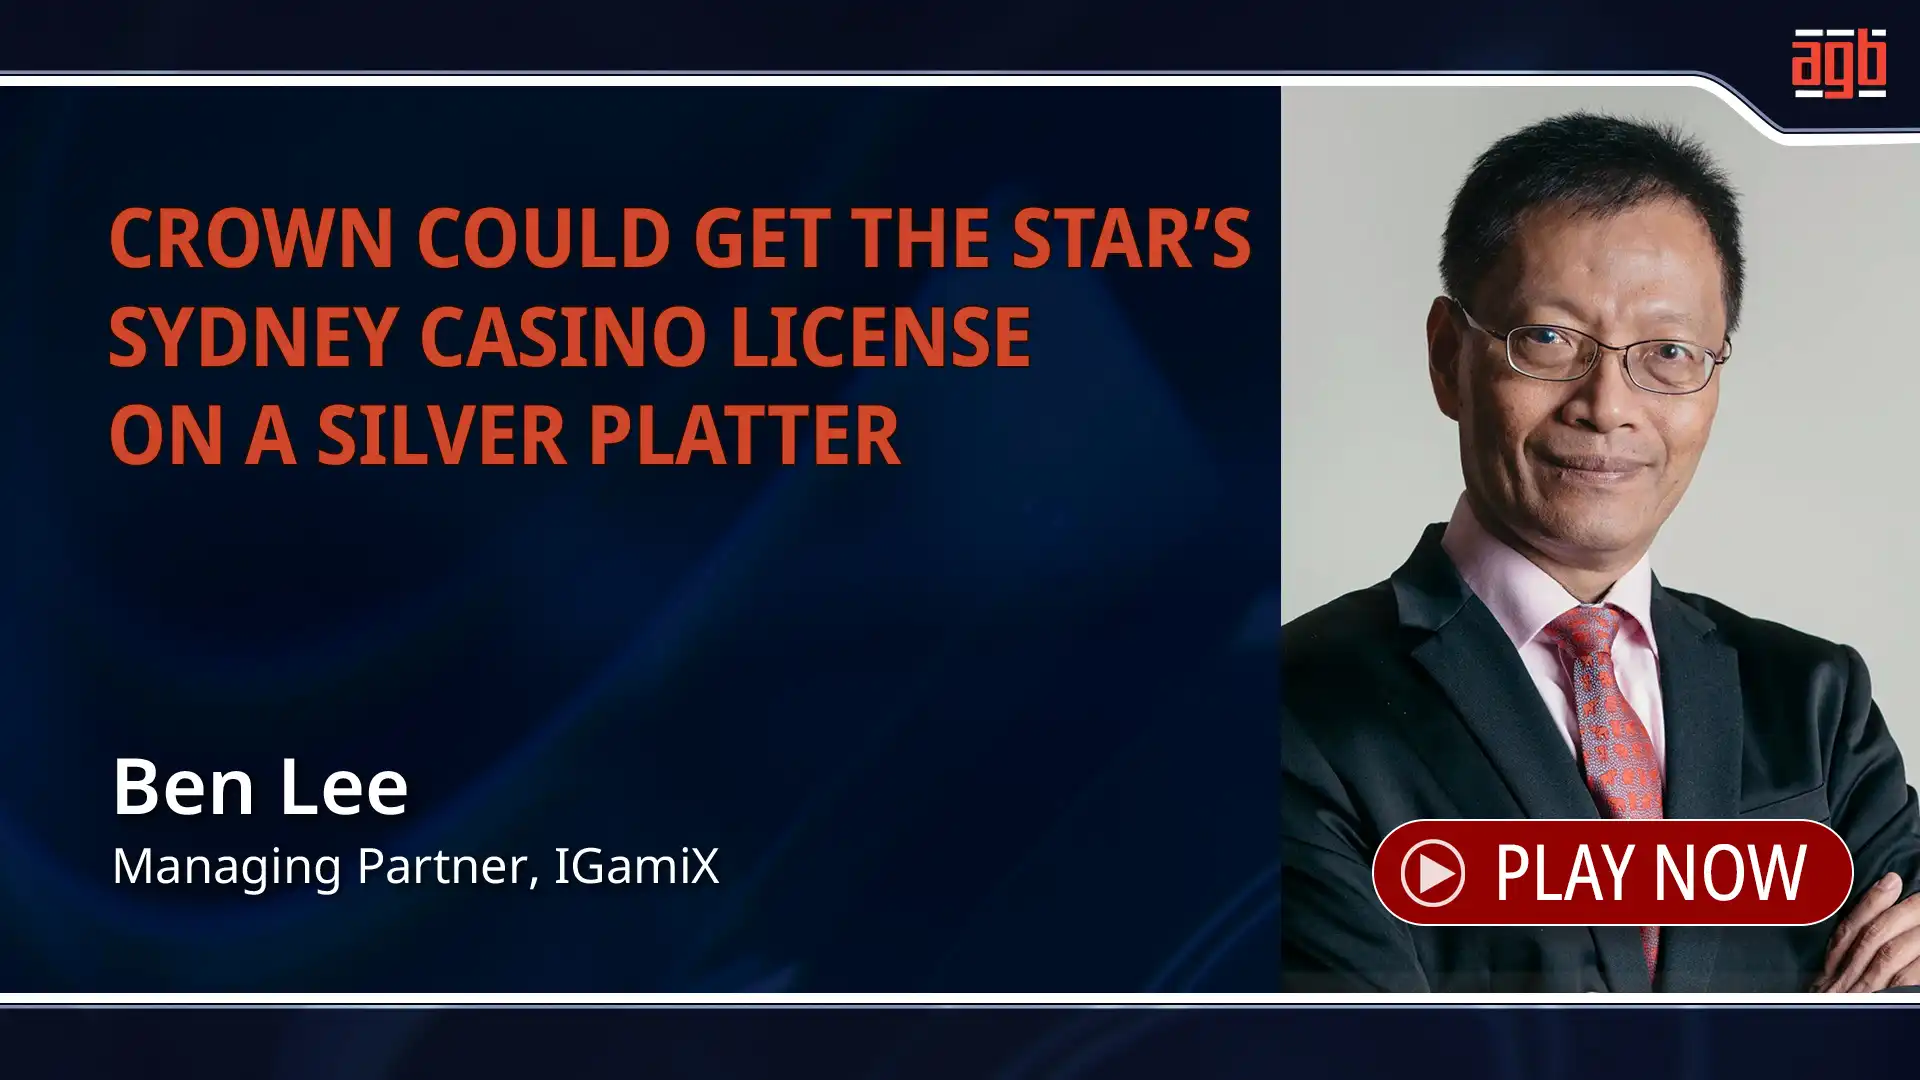 Crown could get The Star’s Sydney casino license on a silver platter Ben Lee